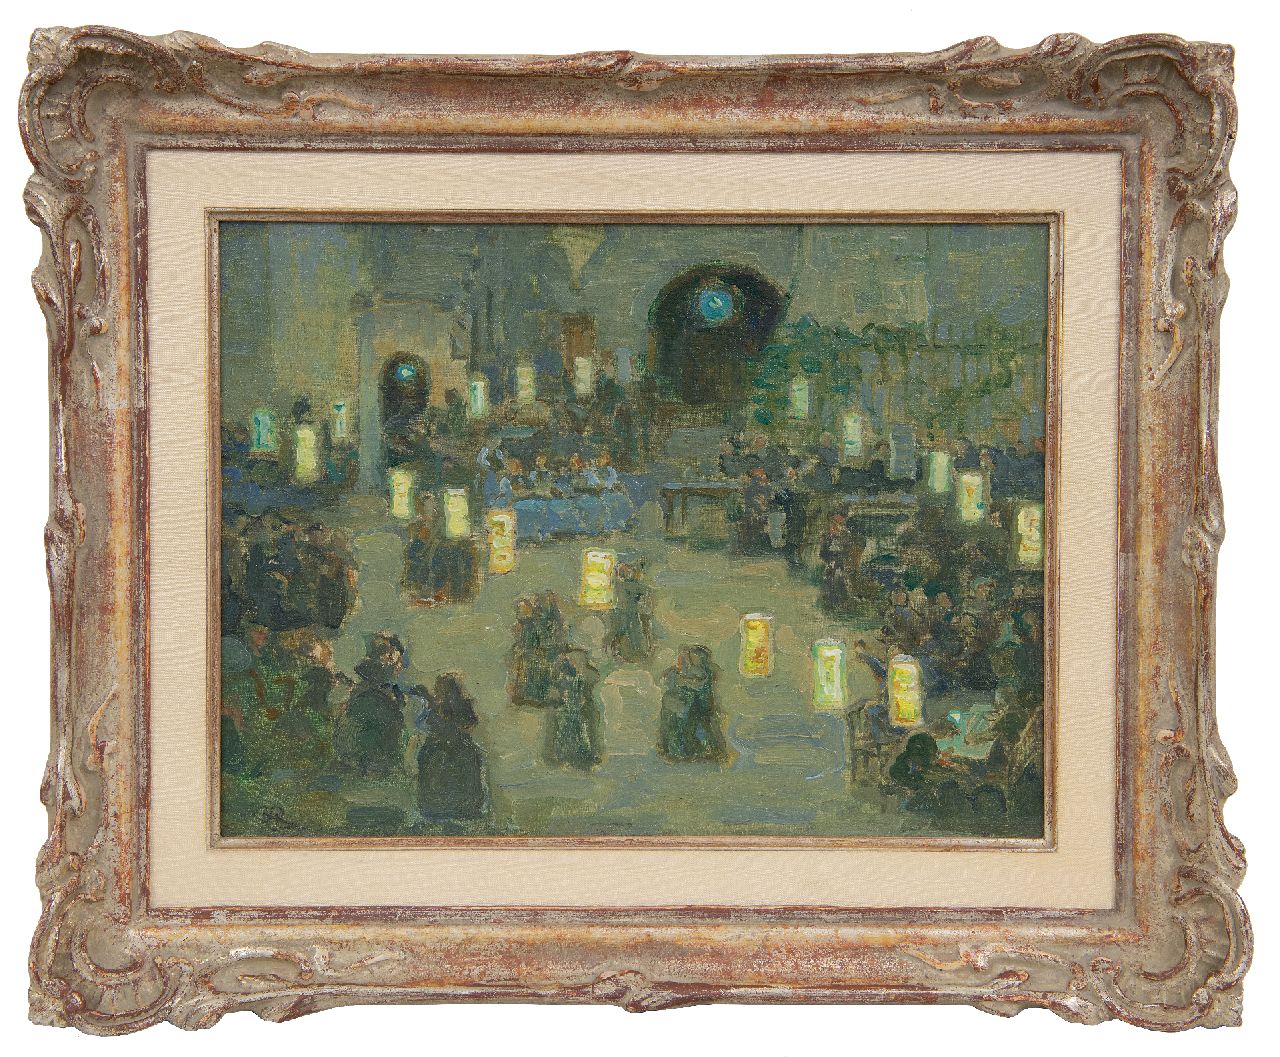 Gerbrands R.  | Roelf Gerbrands | Paintings offered for sale | The dancing contest, oil on painter's cardboard 23.8 x 31.8 cm, signed l.l. with initials